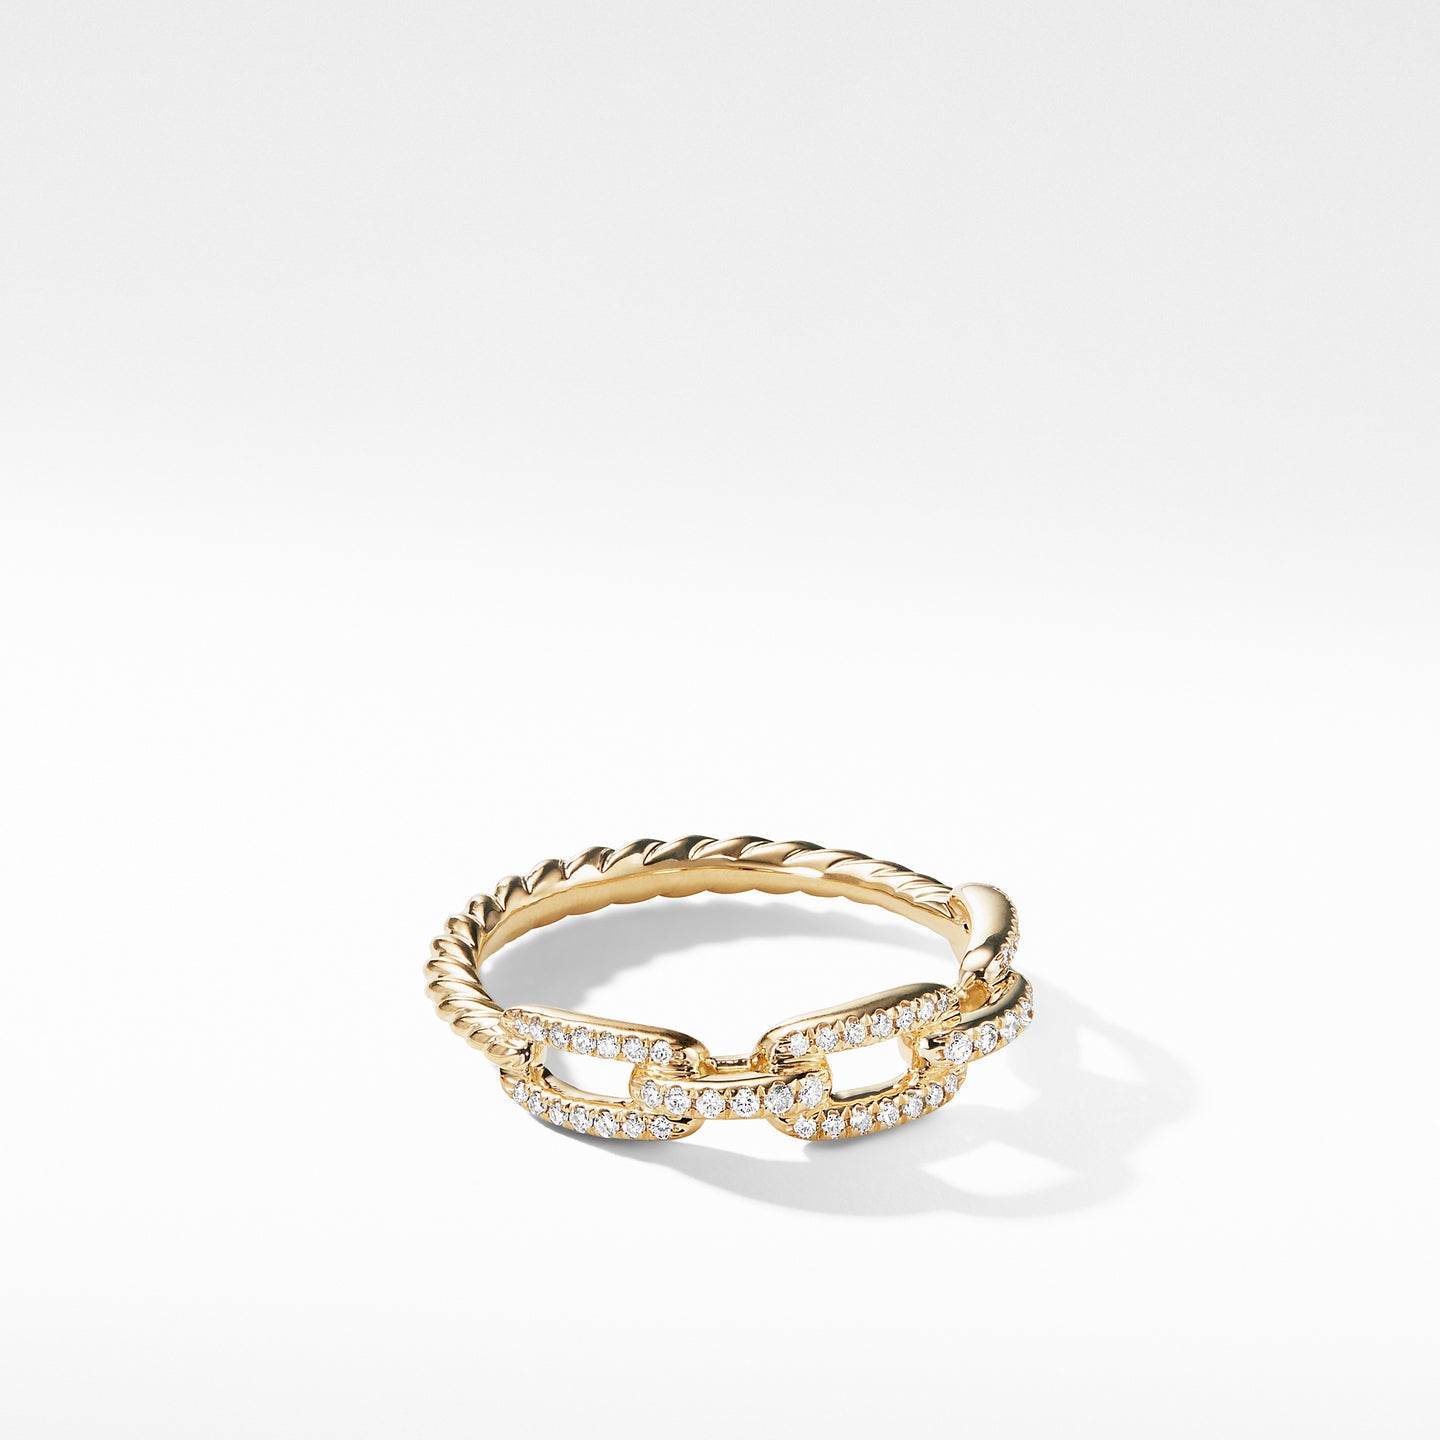 Stax Single Row Pavé Chain Link Ring with Diamonds in 18K Gold, 4.5mm, Size 7